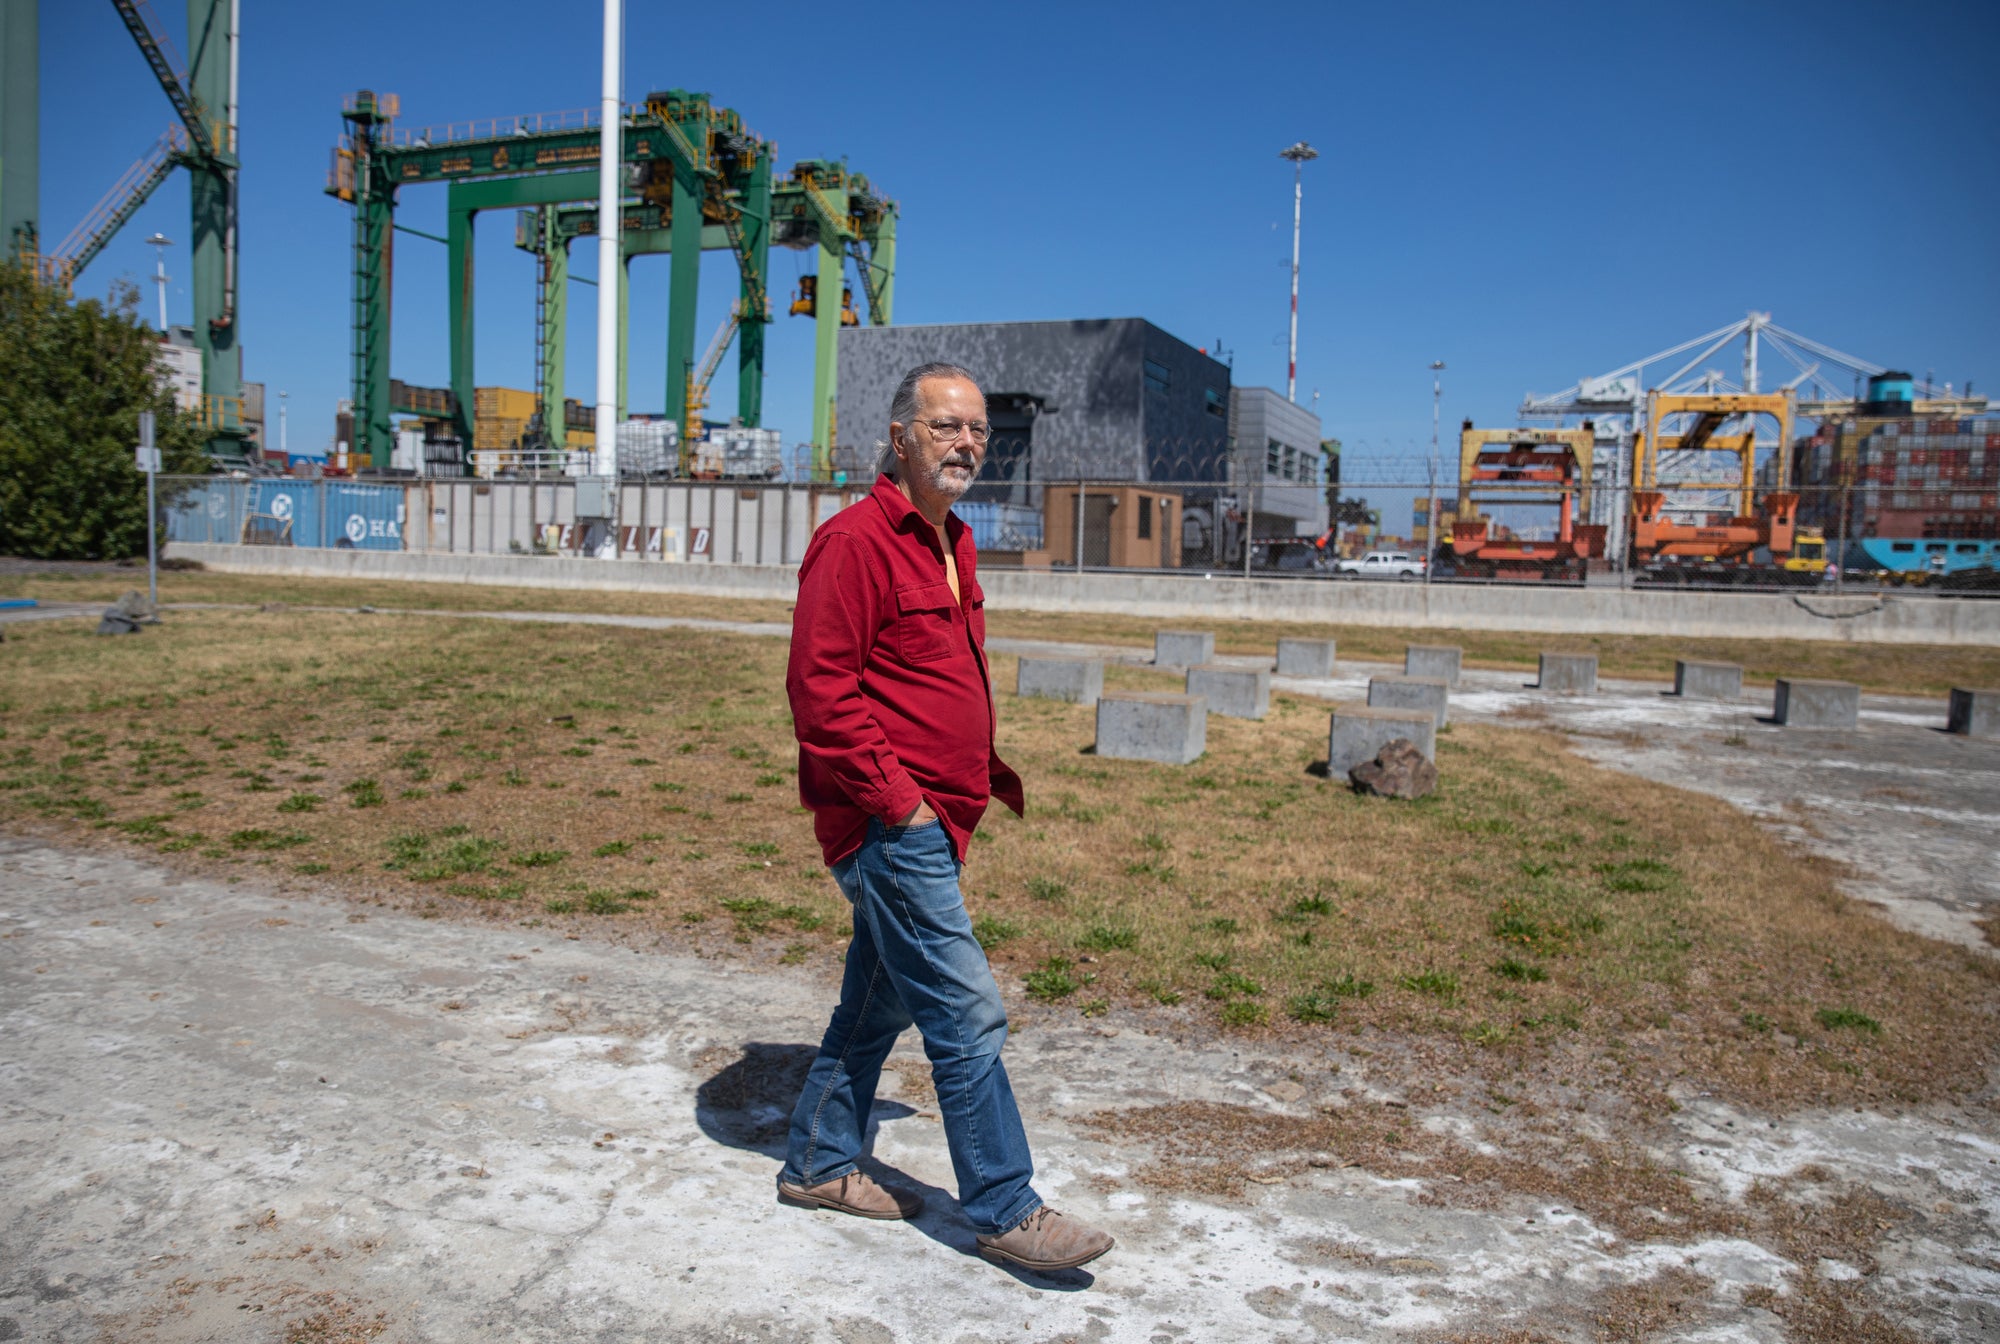 Brian Beveridge, co-director of the Oakland Environmental Indicators Project (WOEIP), photographed at the Port of Oakland in West Oakland, California.